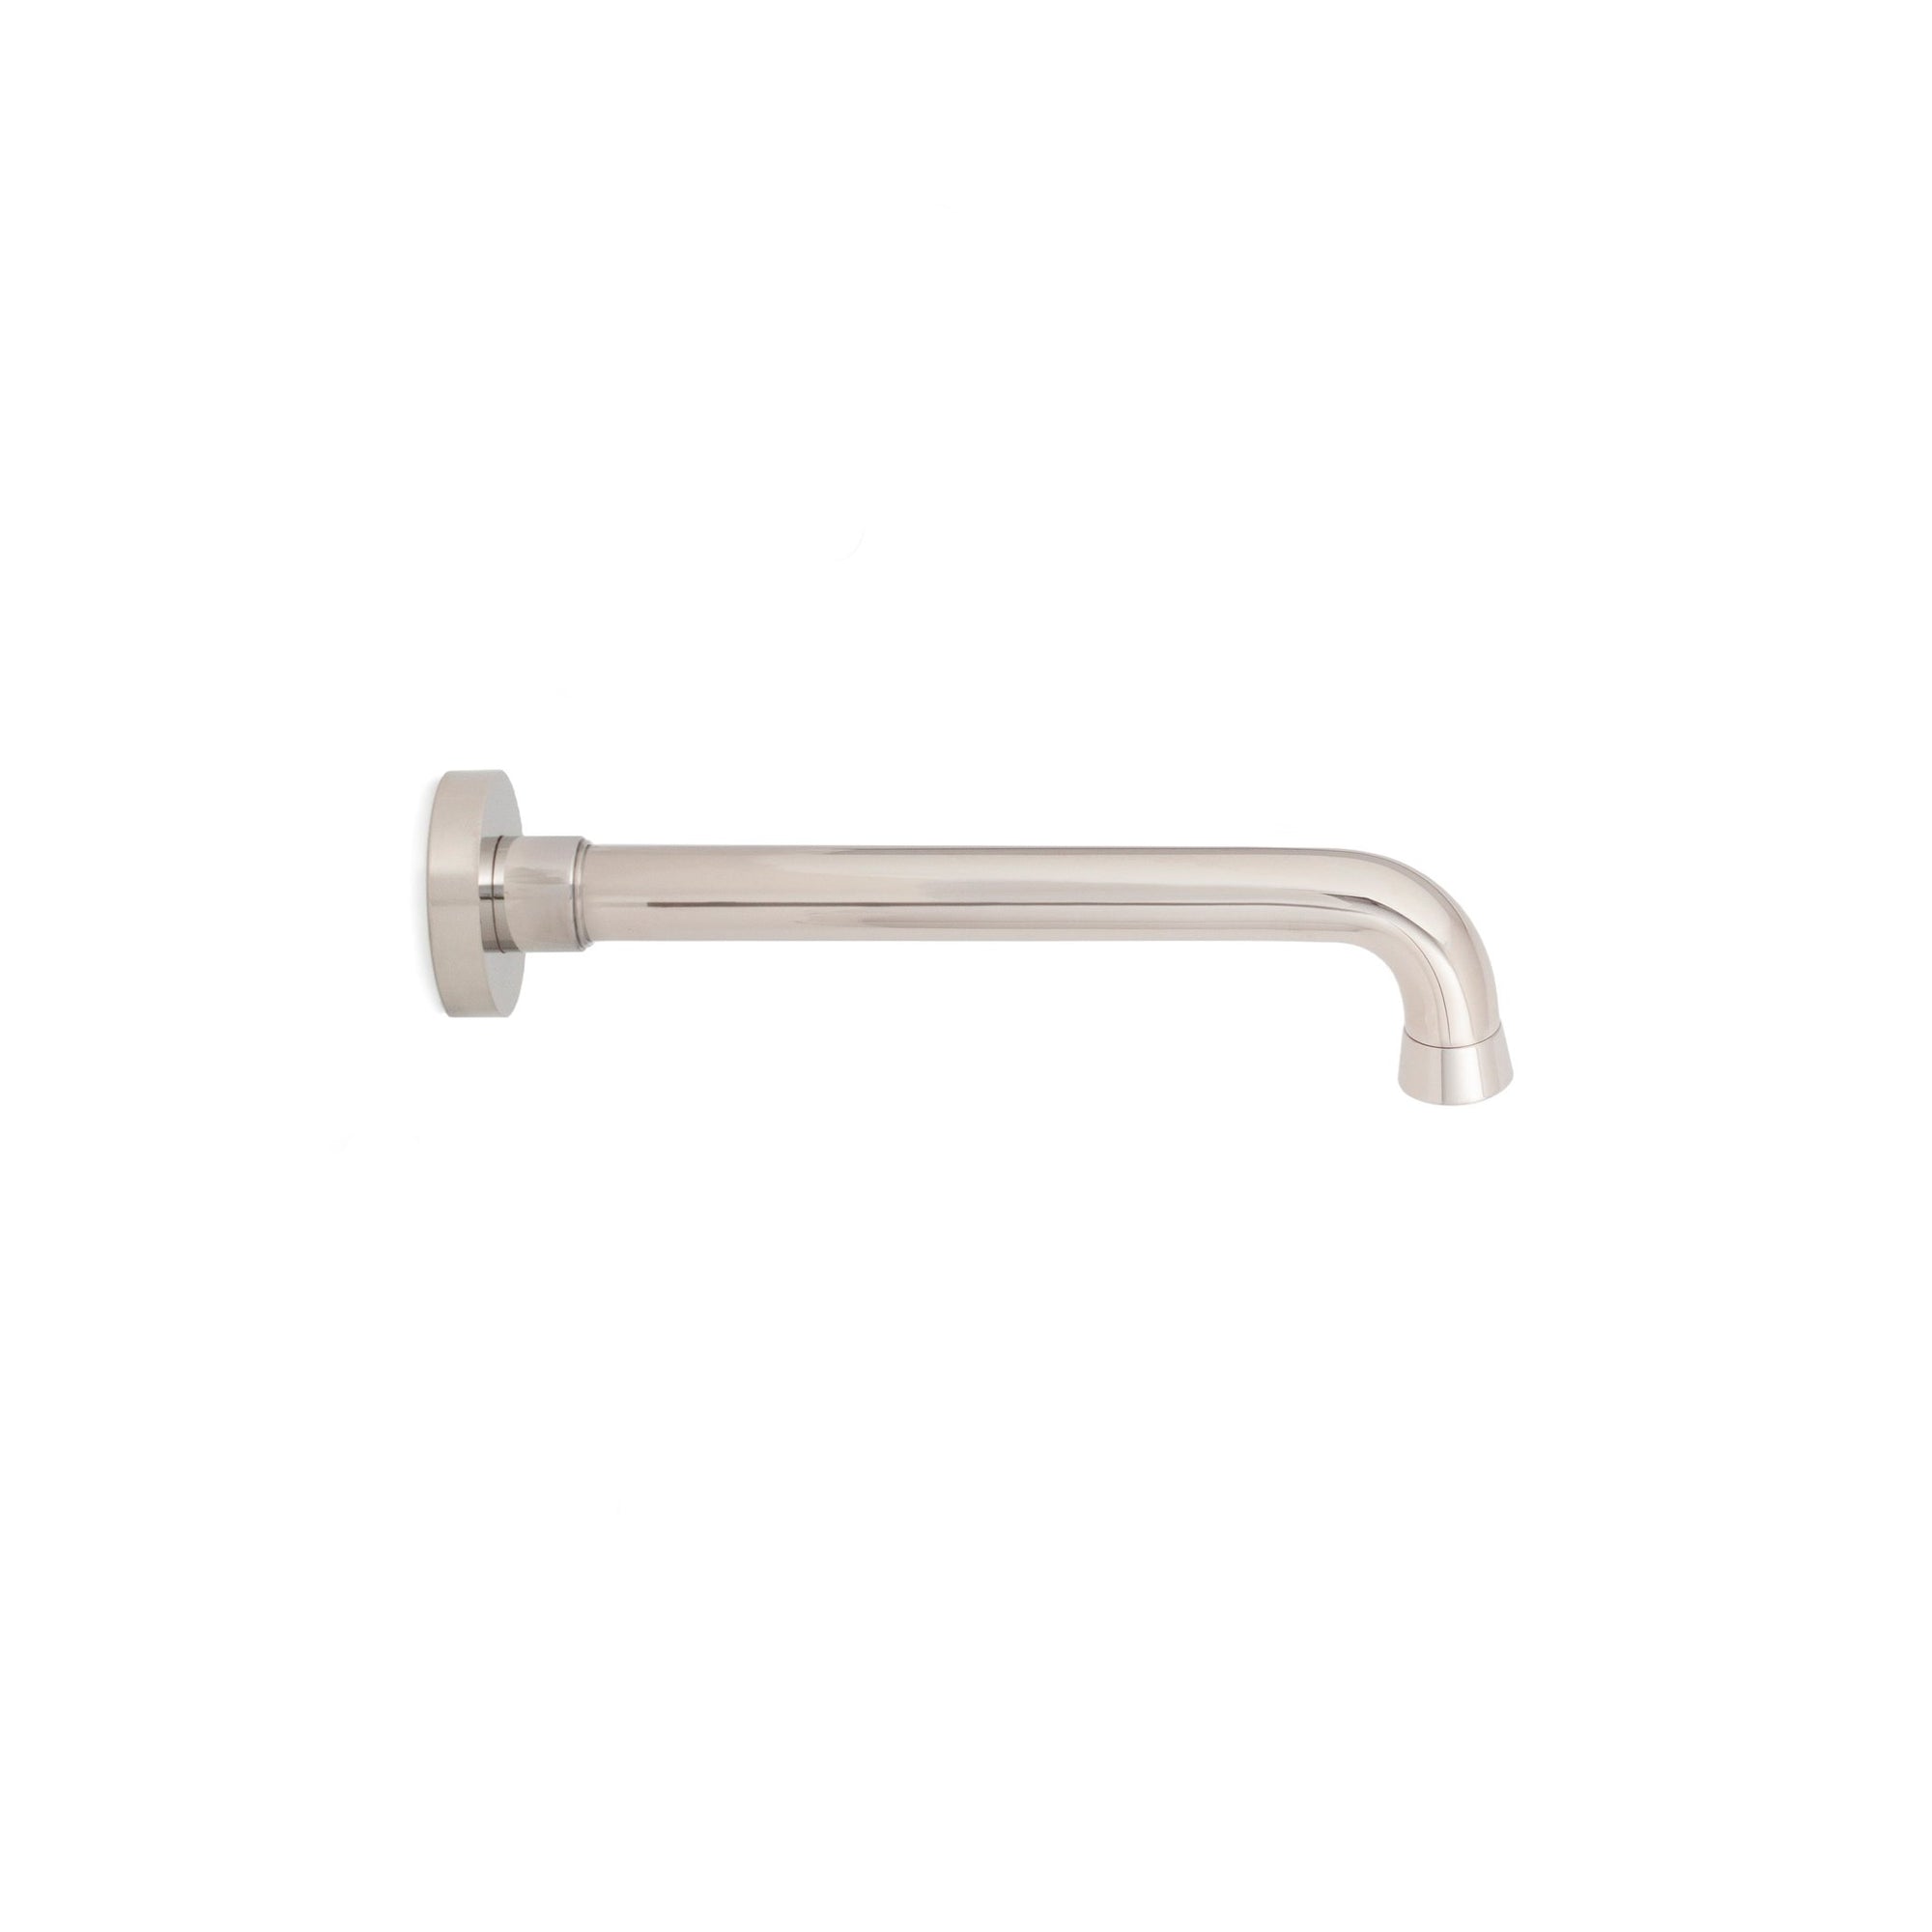 0806TUB-DR-HP Sherle Wagner International Dorian Wall Mount Tub Spout in High Polished Platinum metal finish